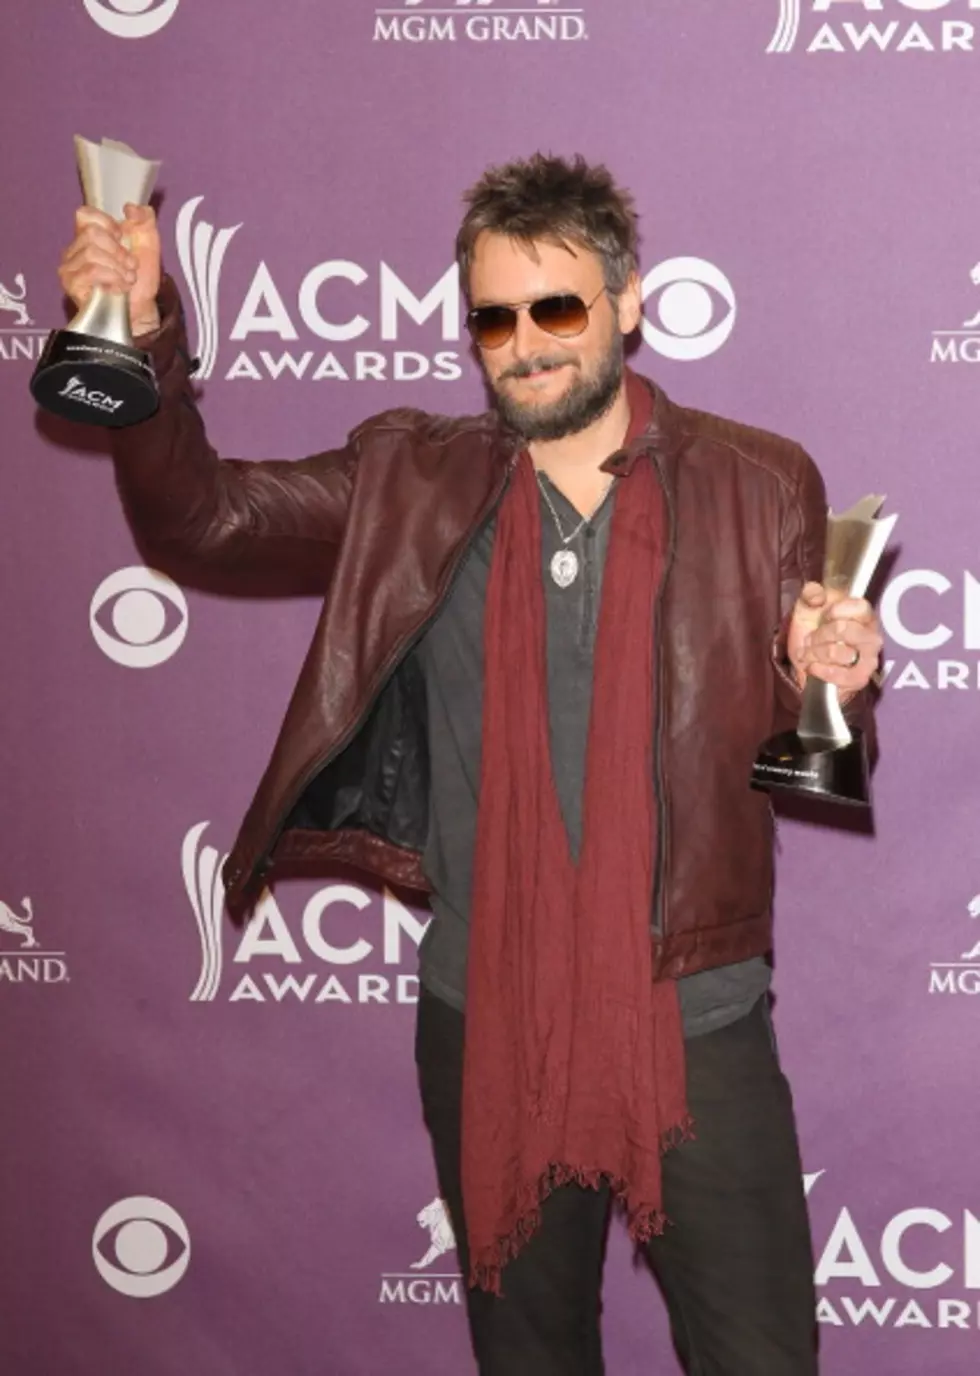 Eric Church Performs Soulful Rendition of “Like Jesus Does” at ACM Awards